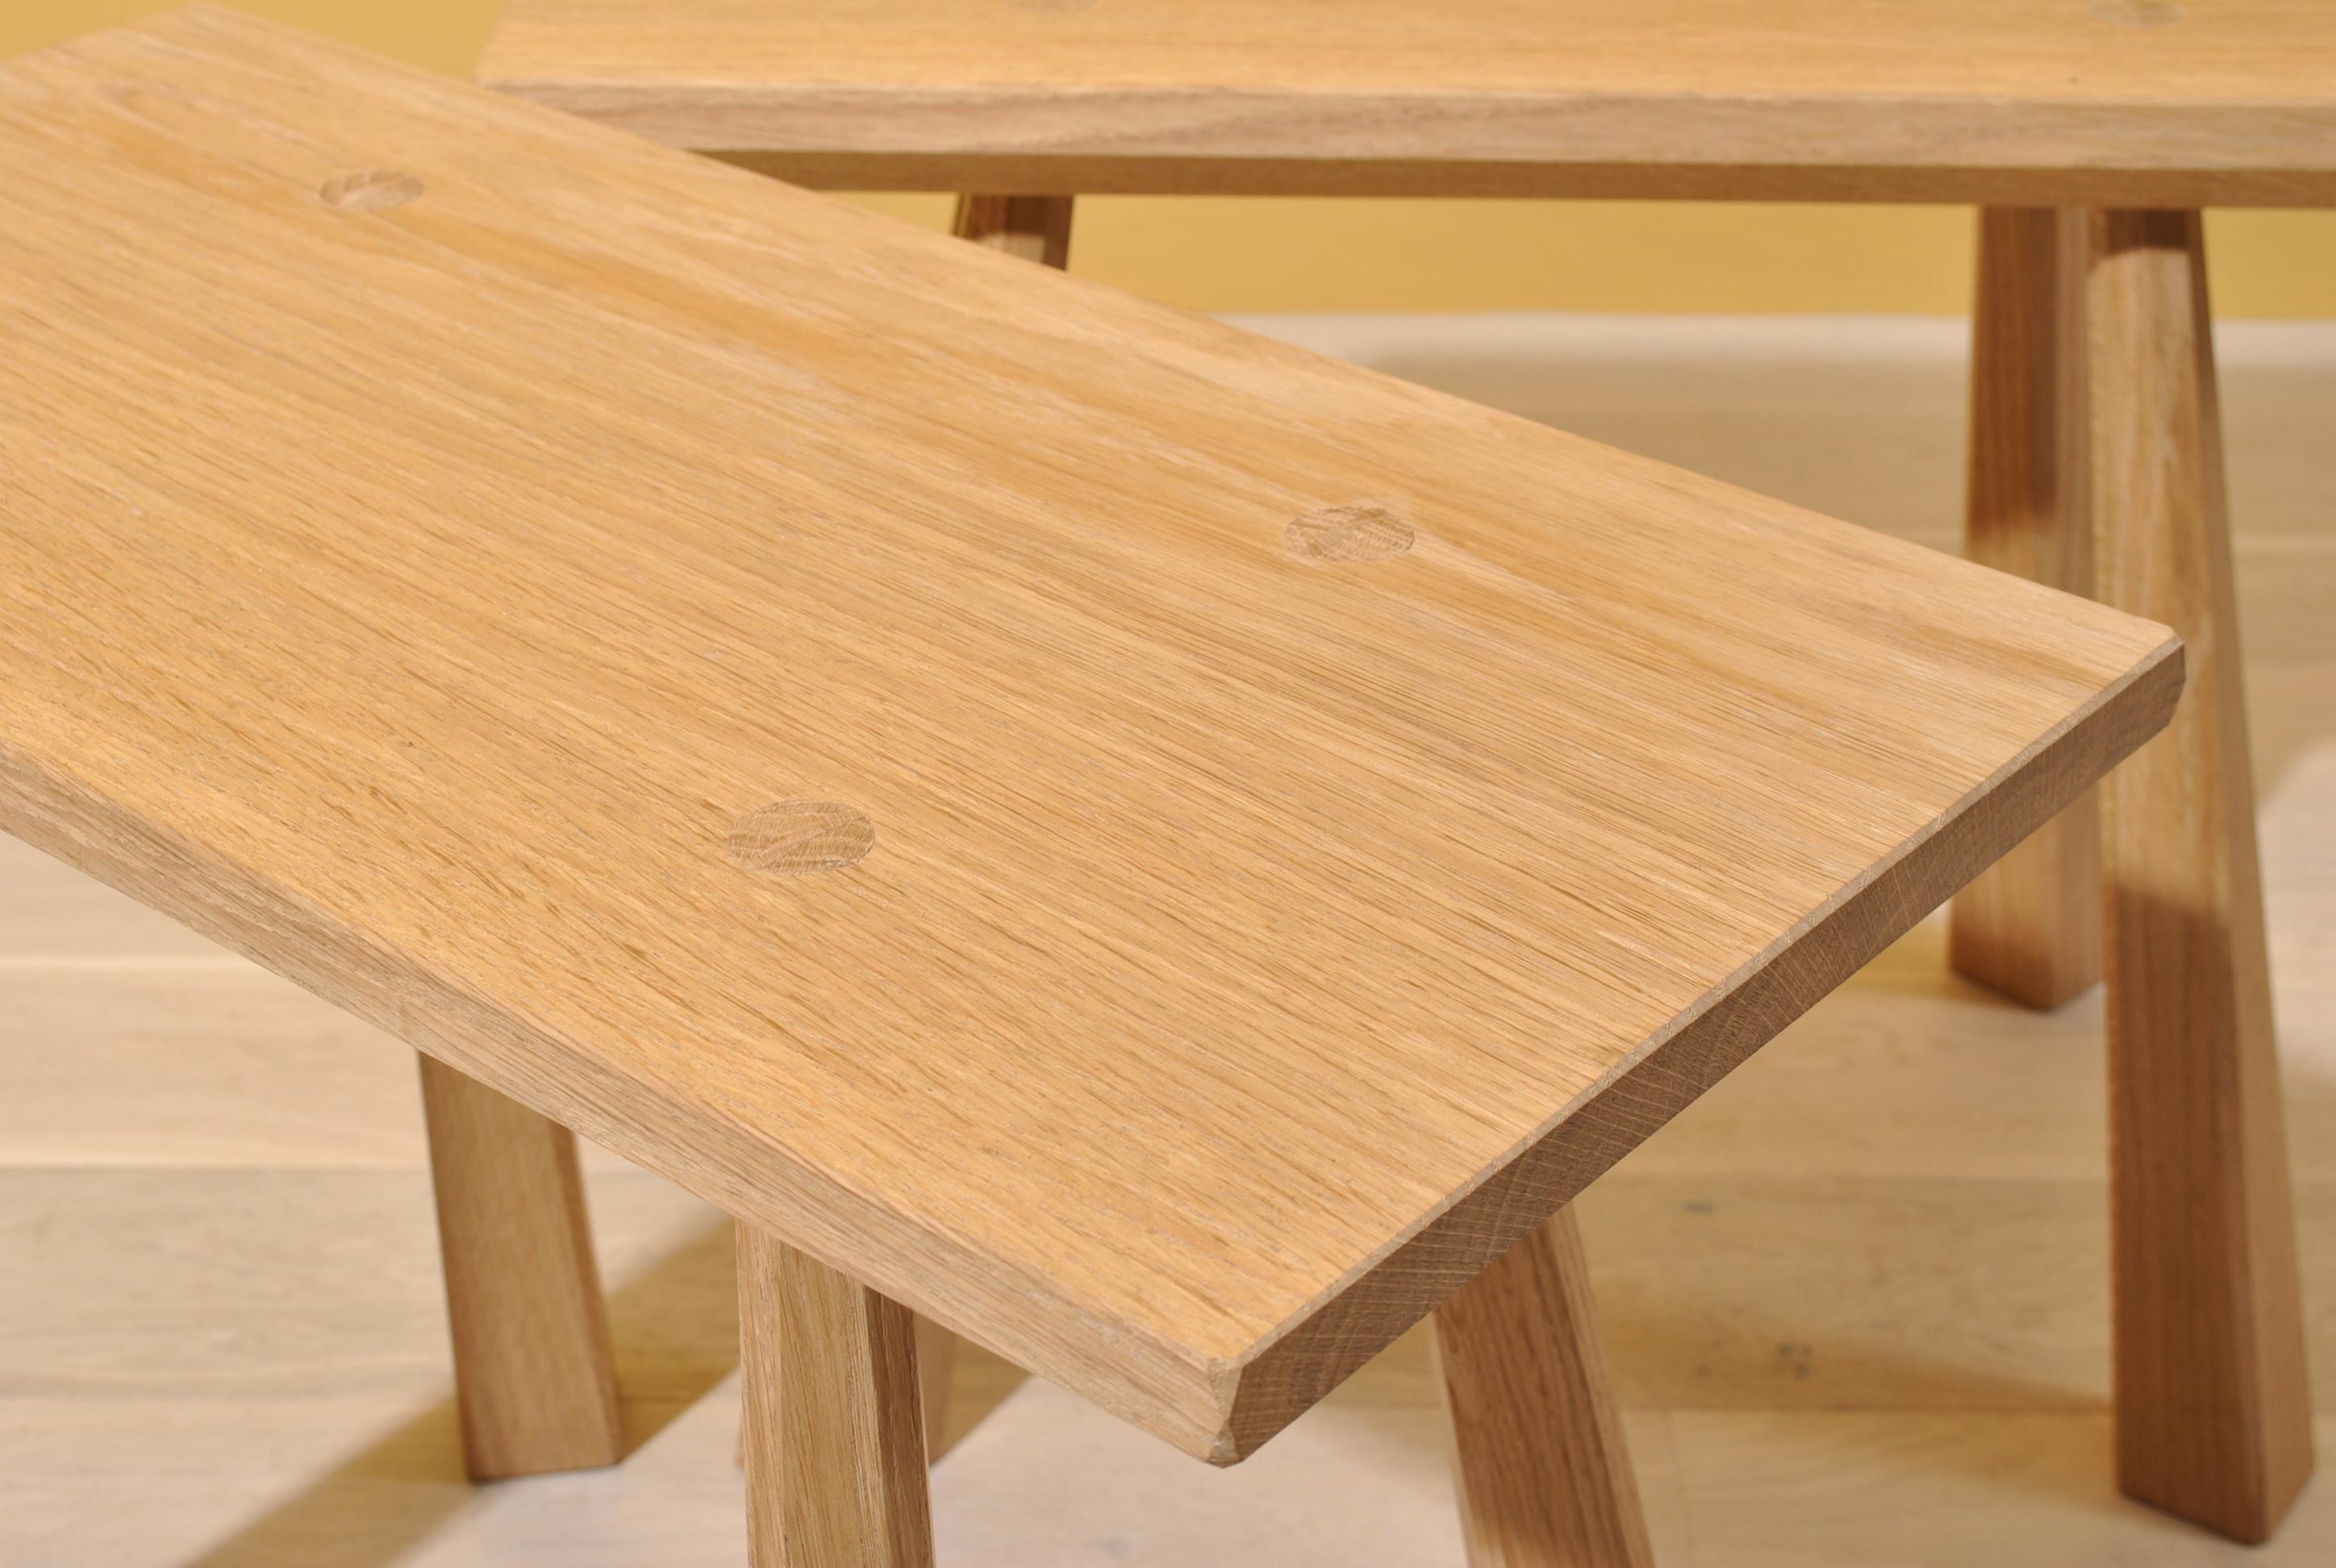 Handcrafted English oak staked legged single seater benches.
This pair of resilient and striking benches are made to typical dining seat height but can be utilised in many other scenarios.
Much of the work is characterised by their predominant use